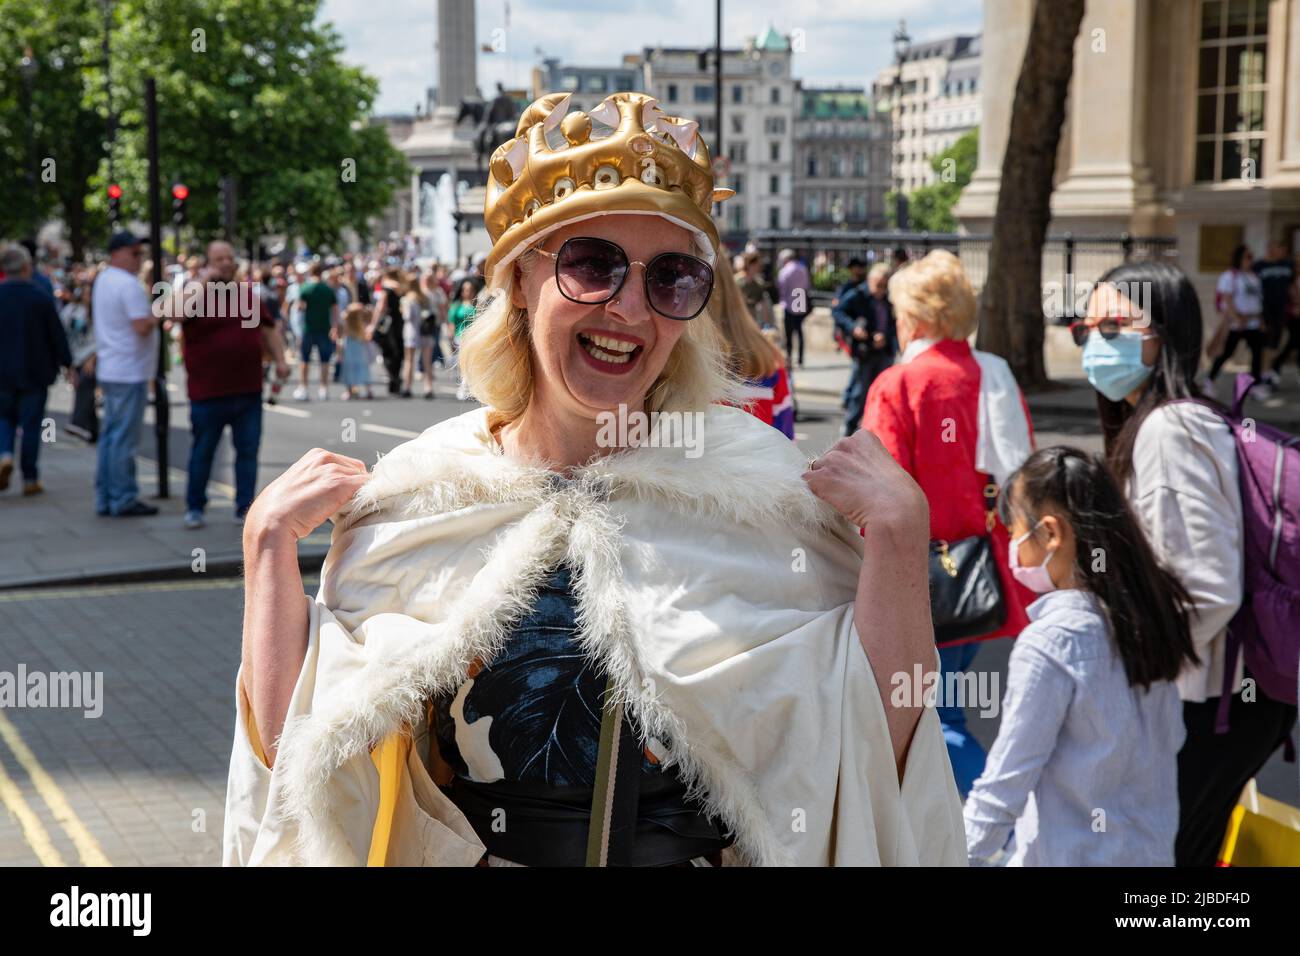 Westminster, London, UK. 2 June 2022. Royal fans congregate in the Mall and Trafalgar Square near Buckingham Palace to celebrate Her Majesty Queen Elizabeth II Platinum Jubilee. This is a weekend marking The Queen’s 70 years reign. Stock Photo